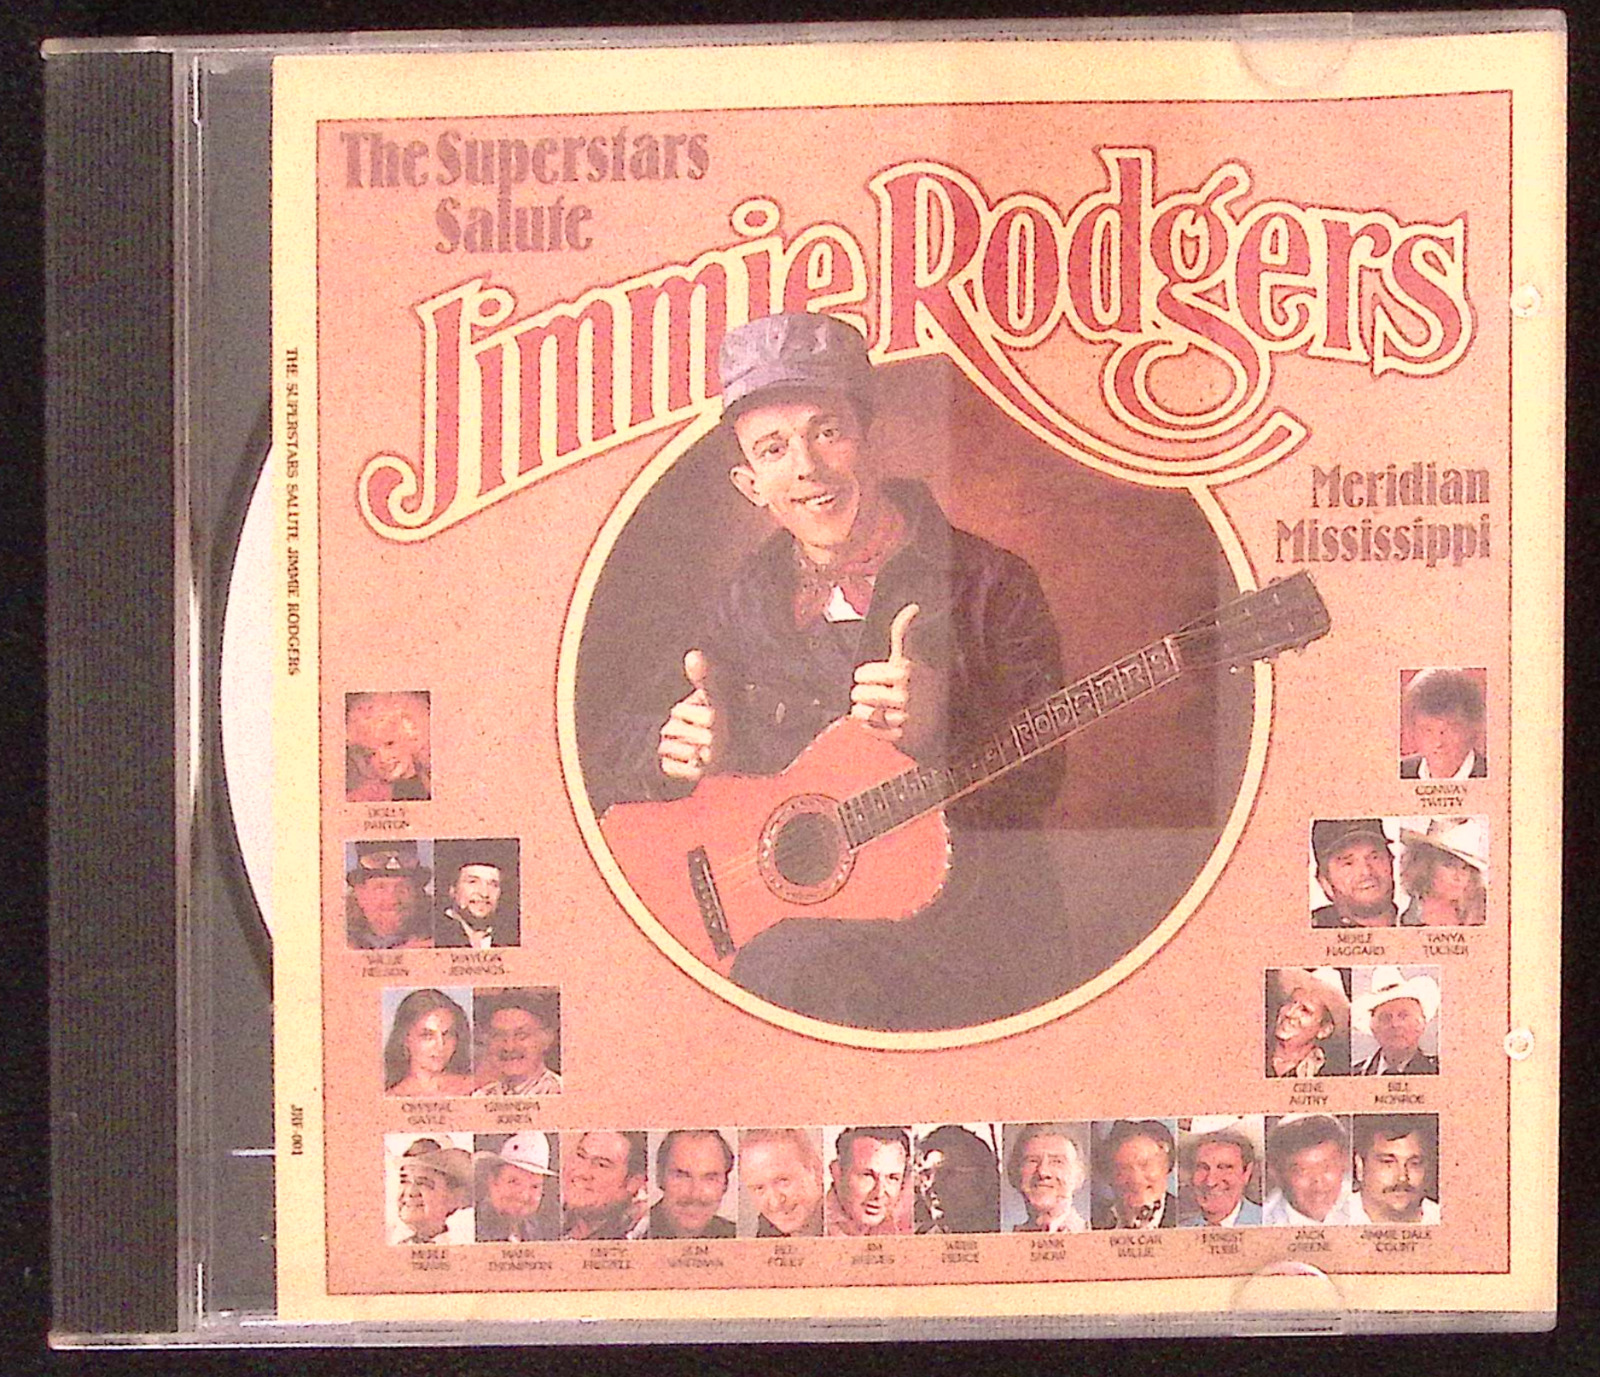 THE SUPERSTARS SALUTE JIMMIE RODGERS MERIDIAN MISSISSIPPI CD 922